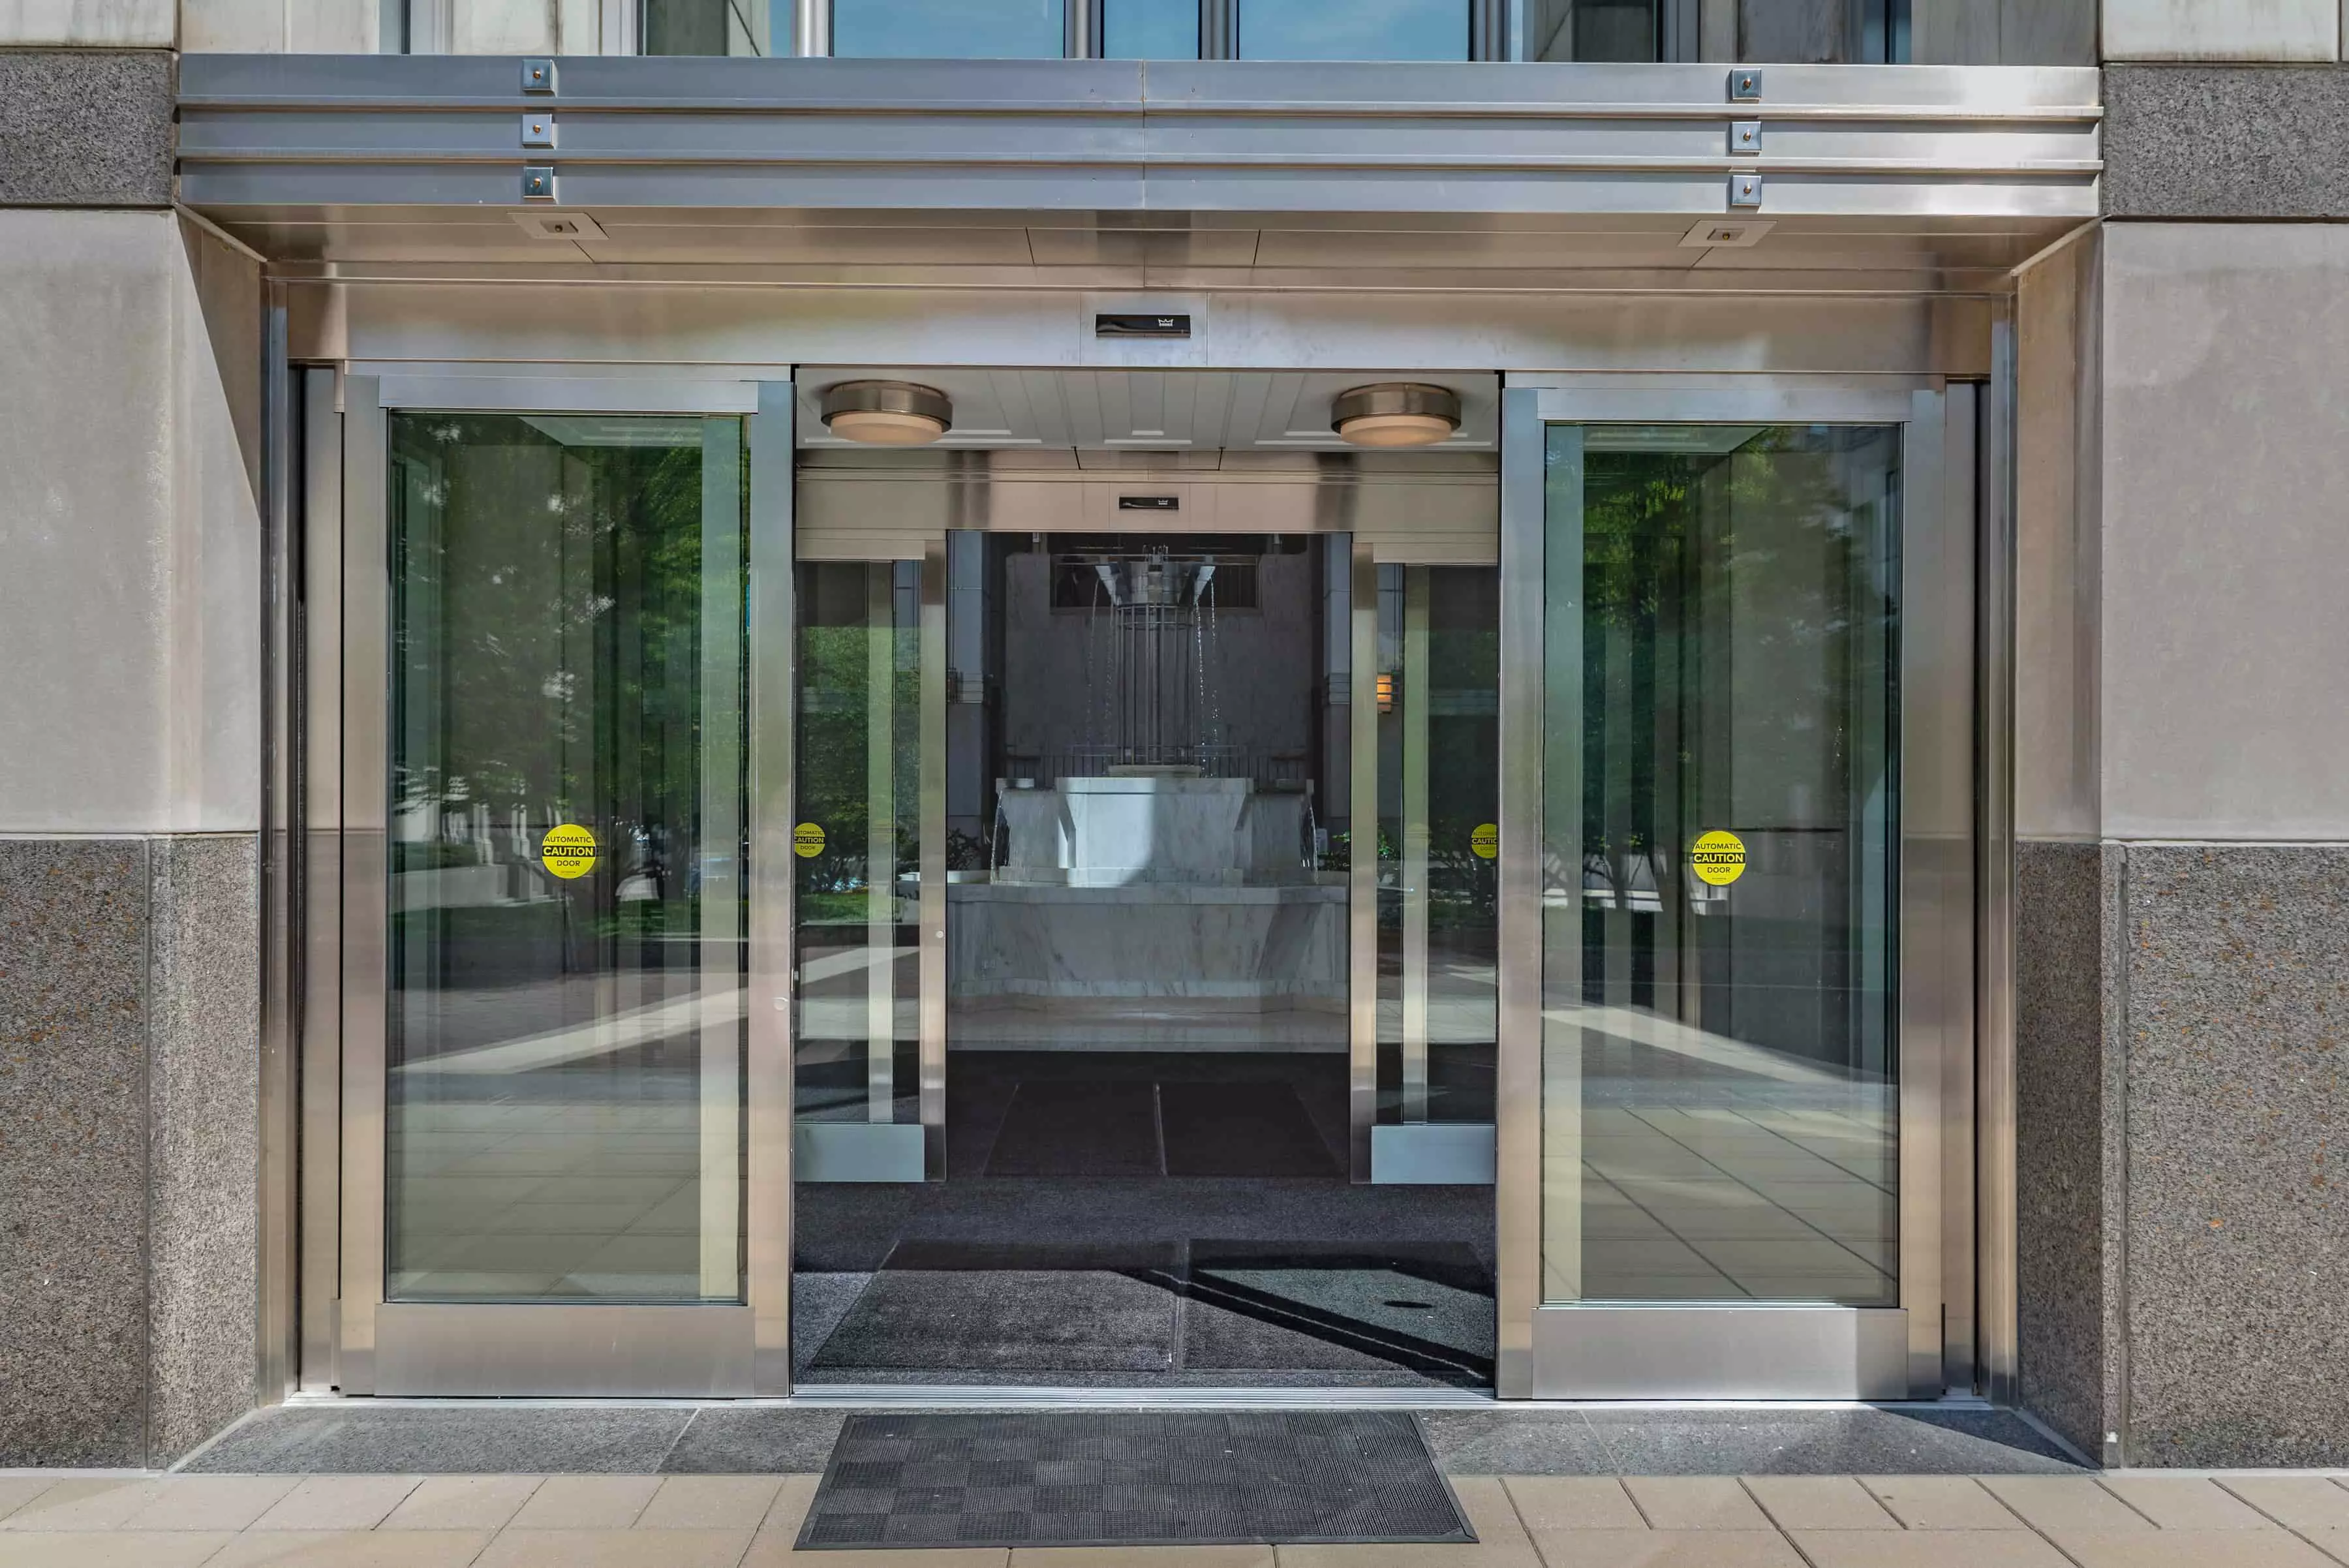 Automatic doors with fountain inside building